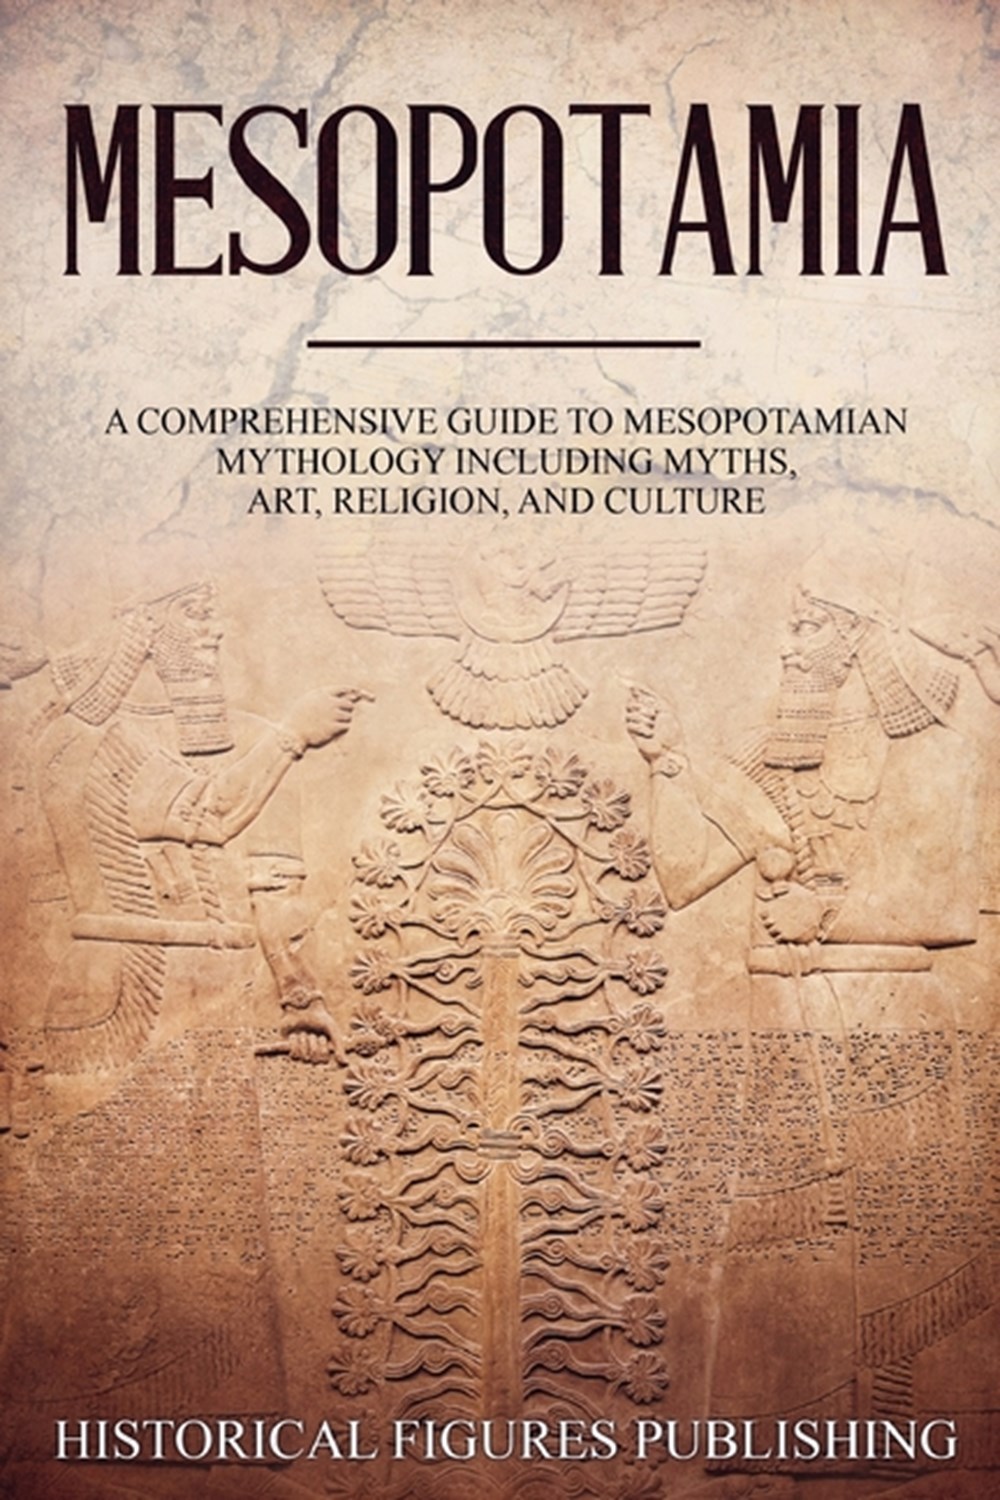 Mesopotamia: A Comprehensive Guide to Sumerian Mythology Including Myths, Art, Religion, and Culture